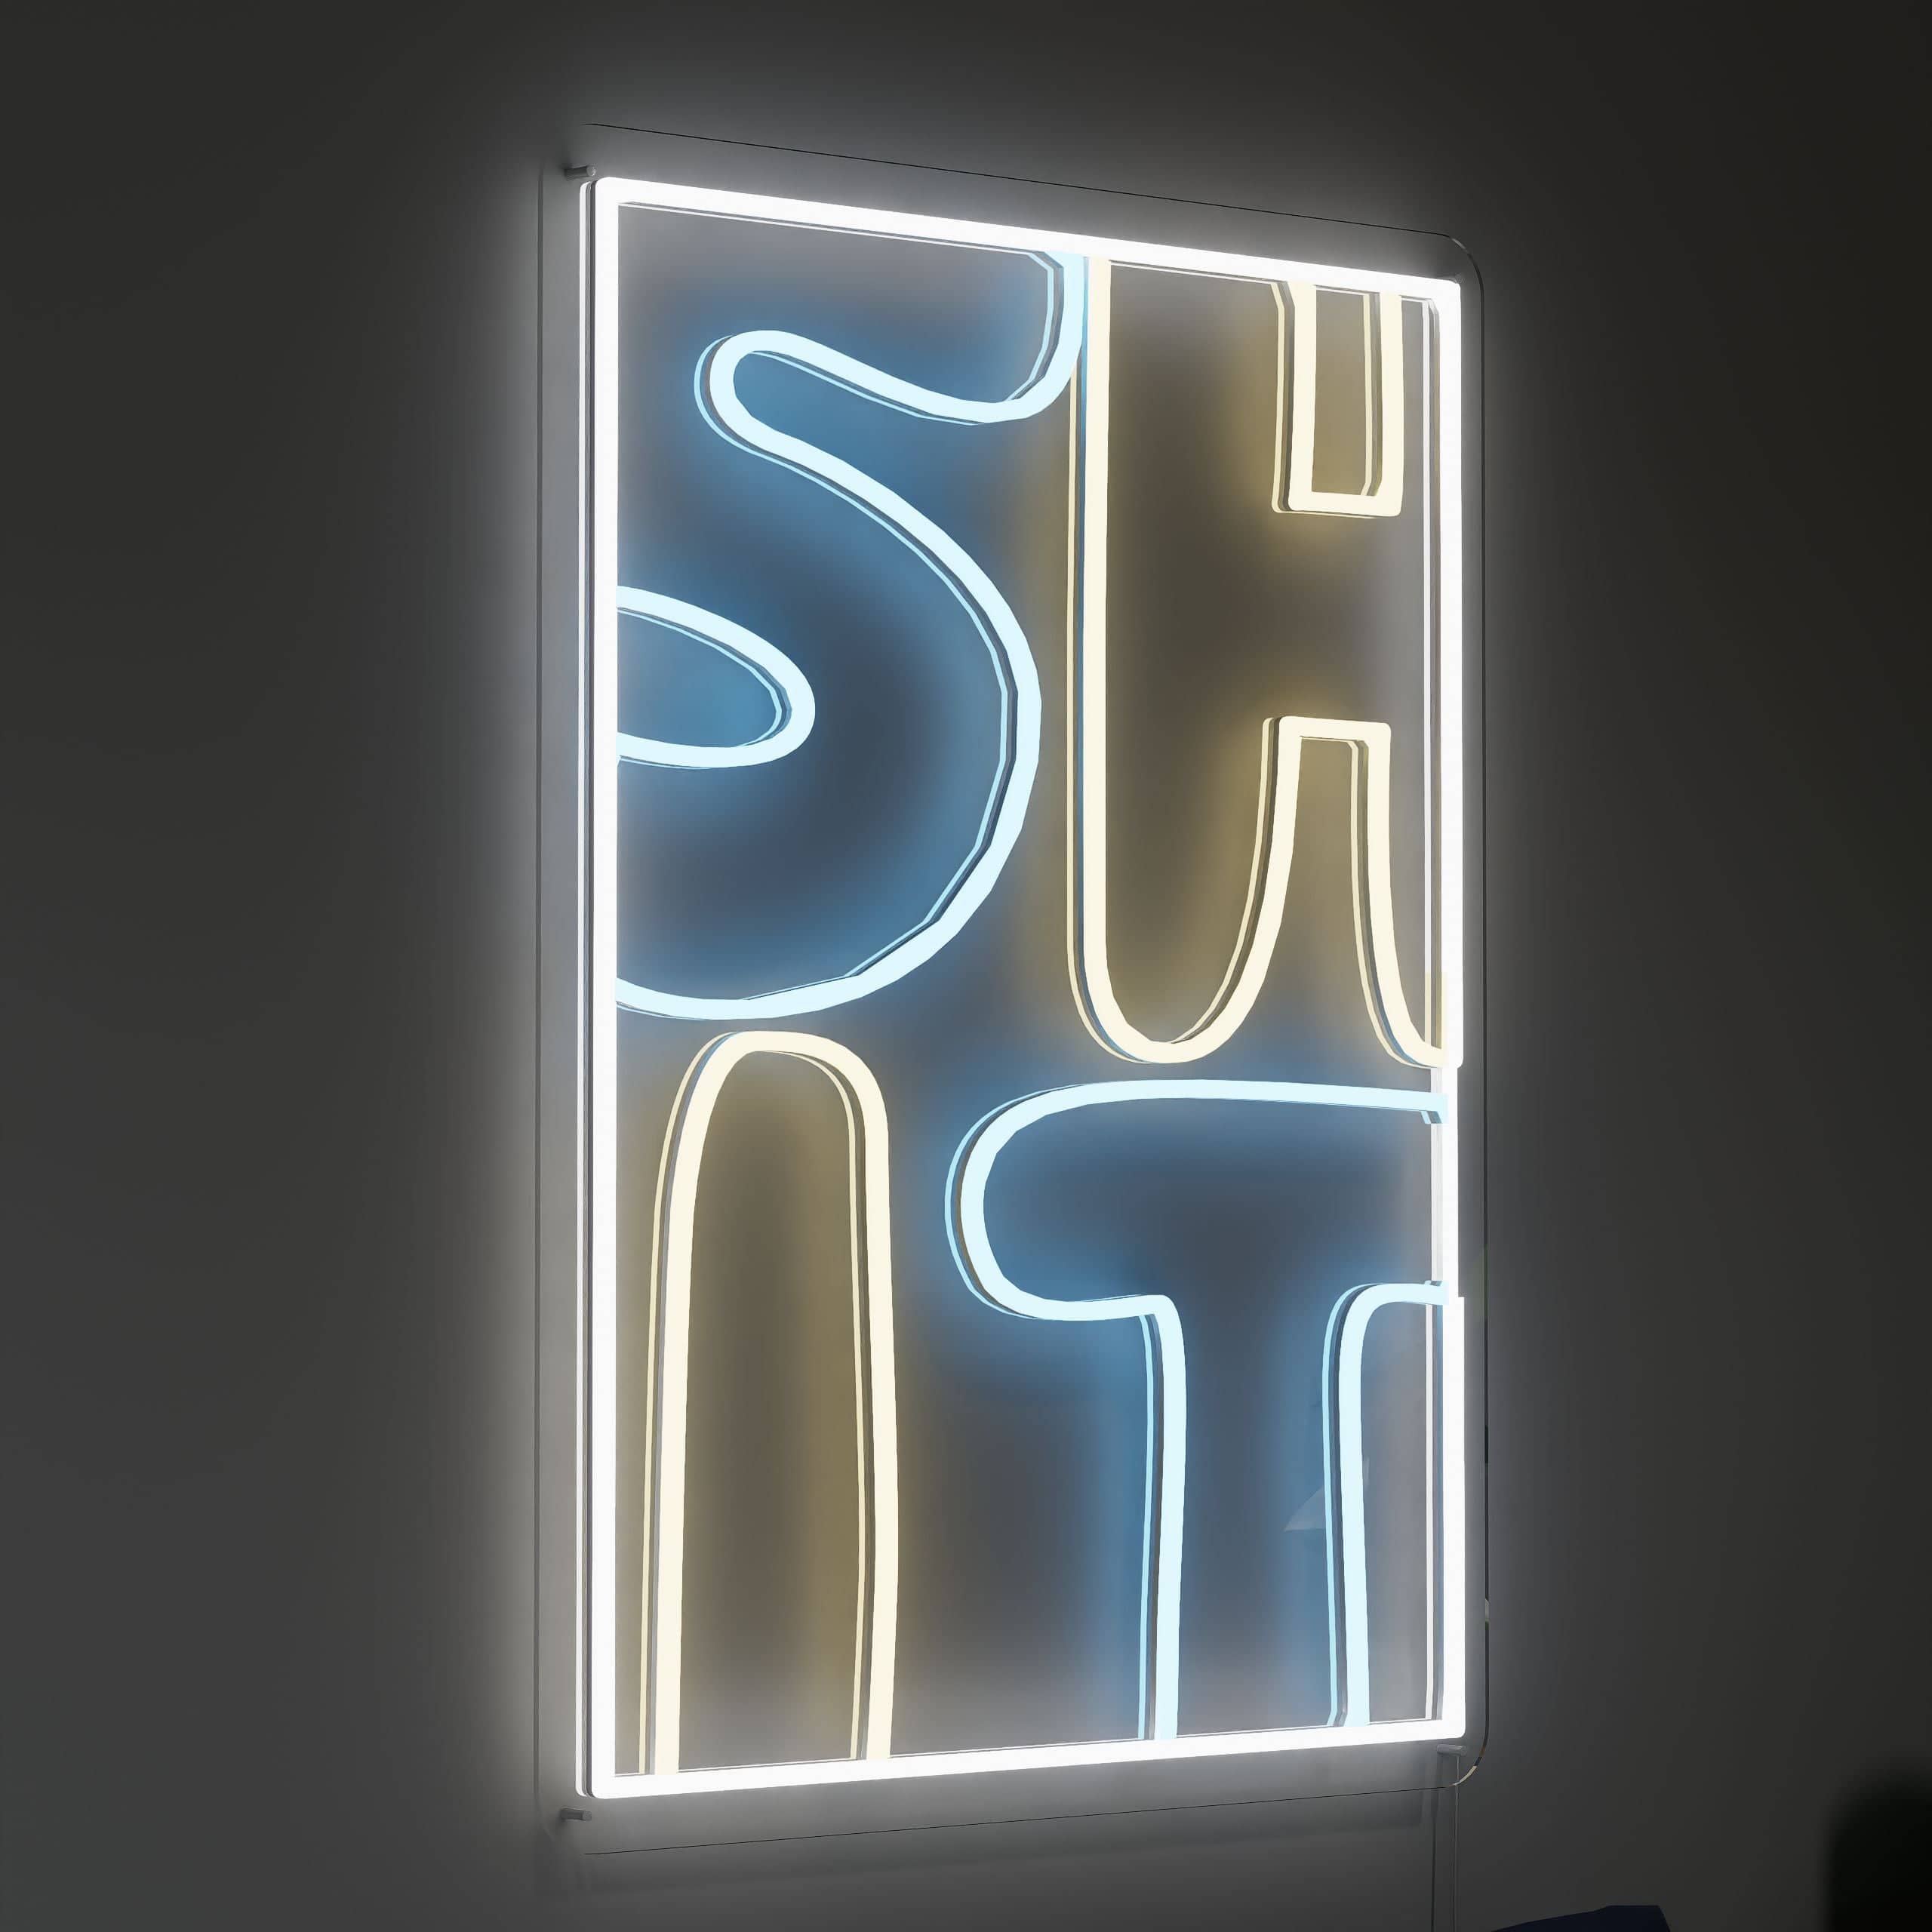 Bright neon bar signs energize workout areas